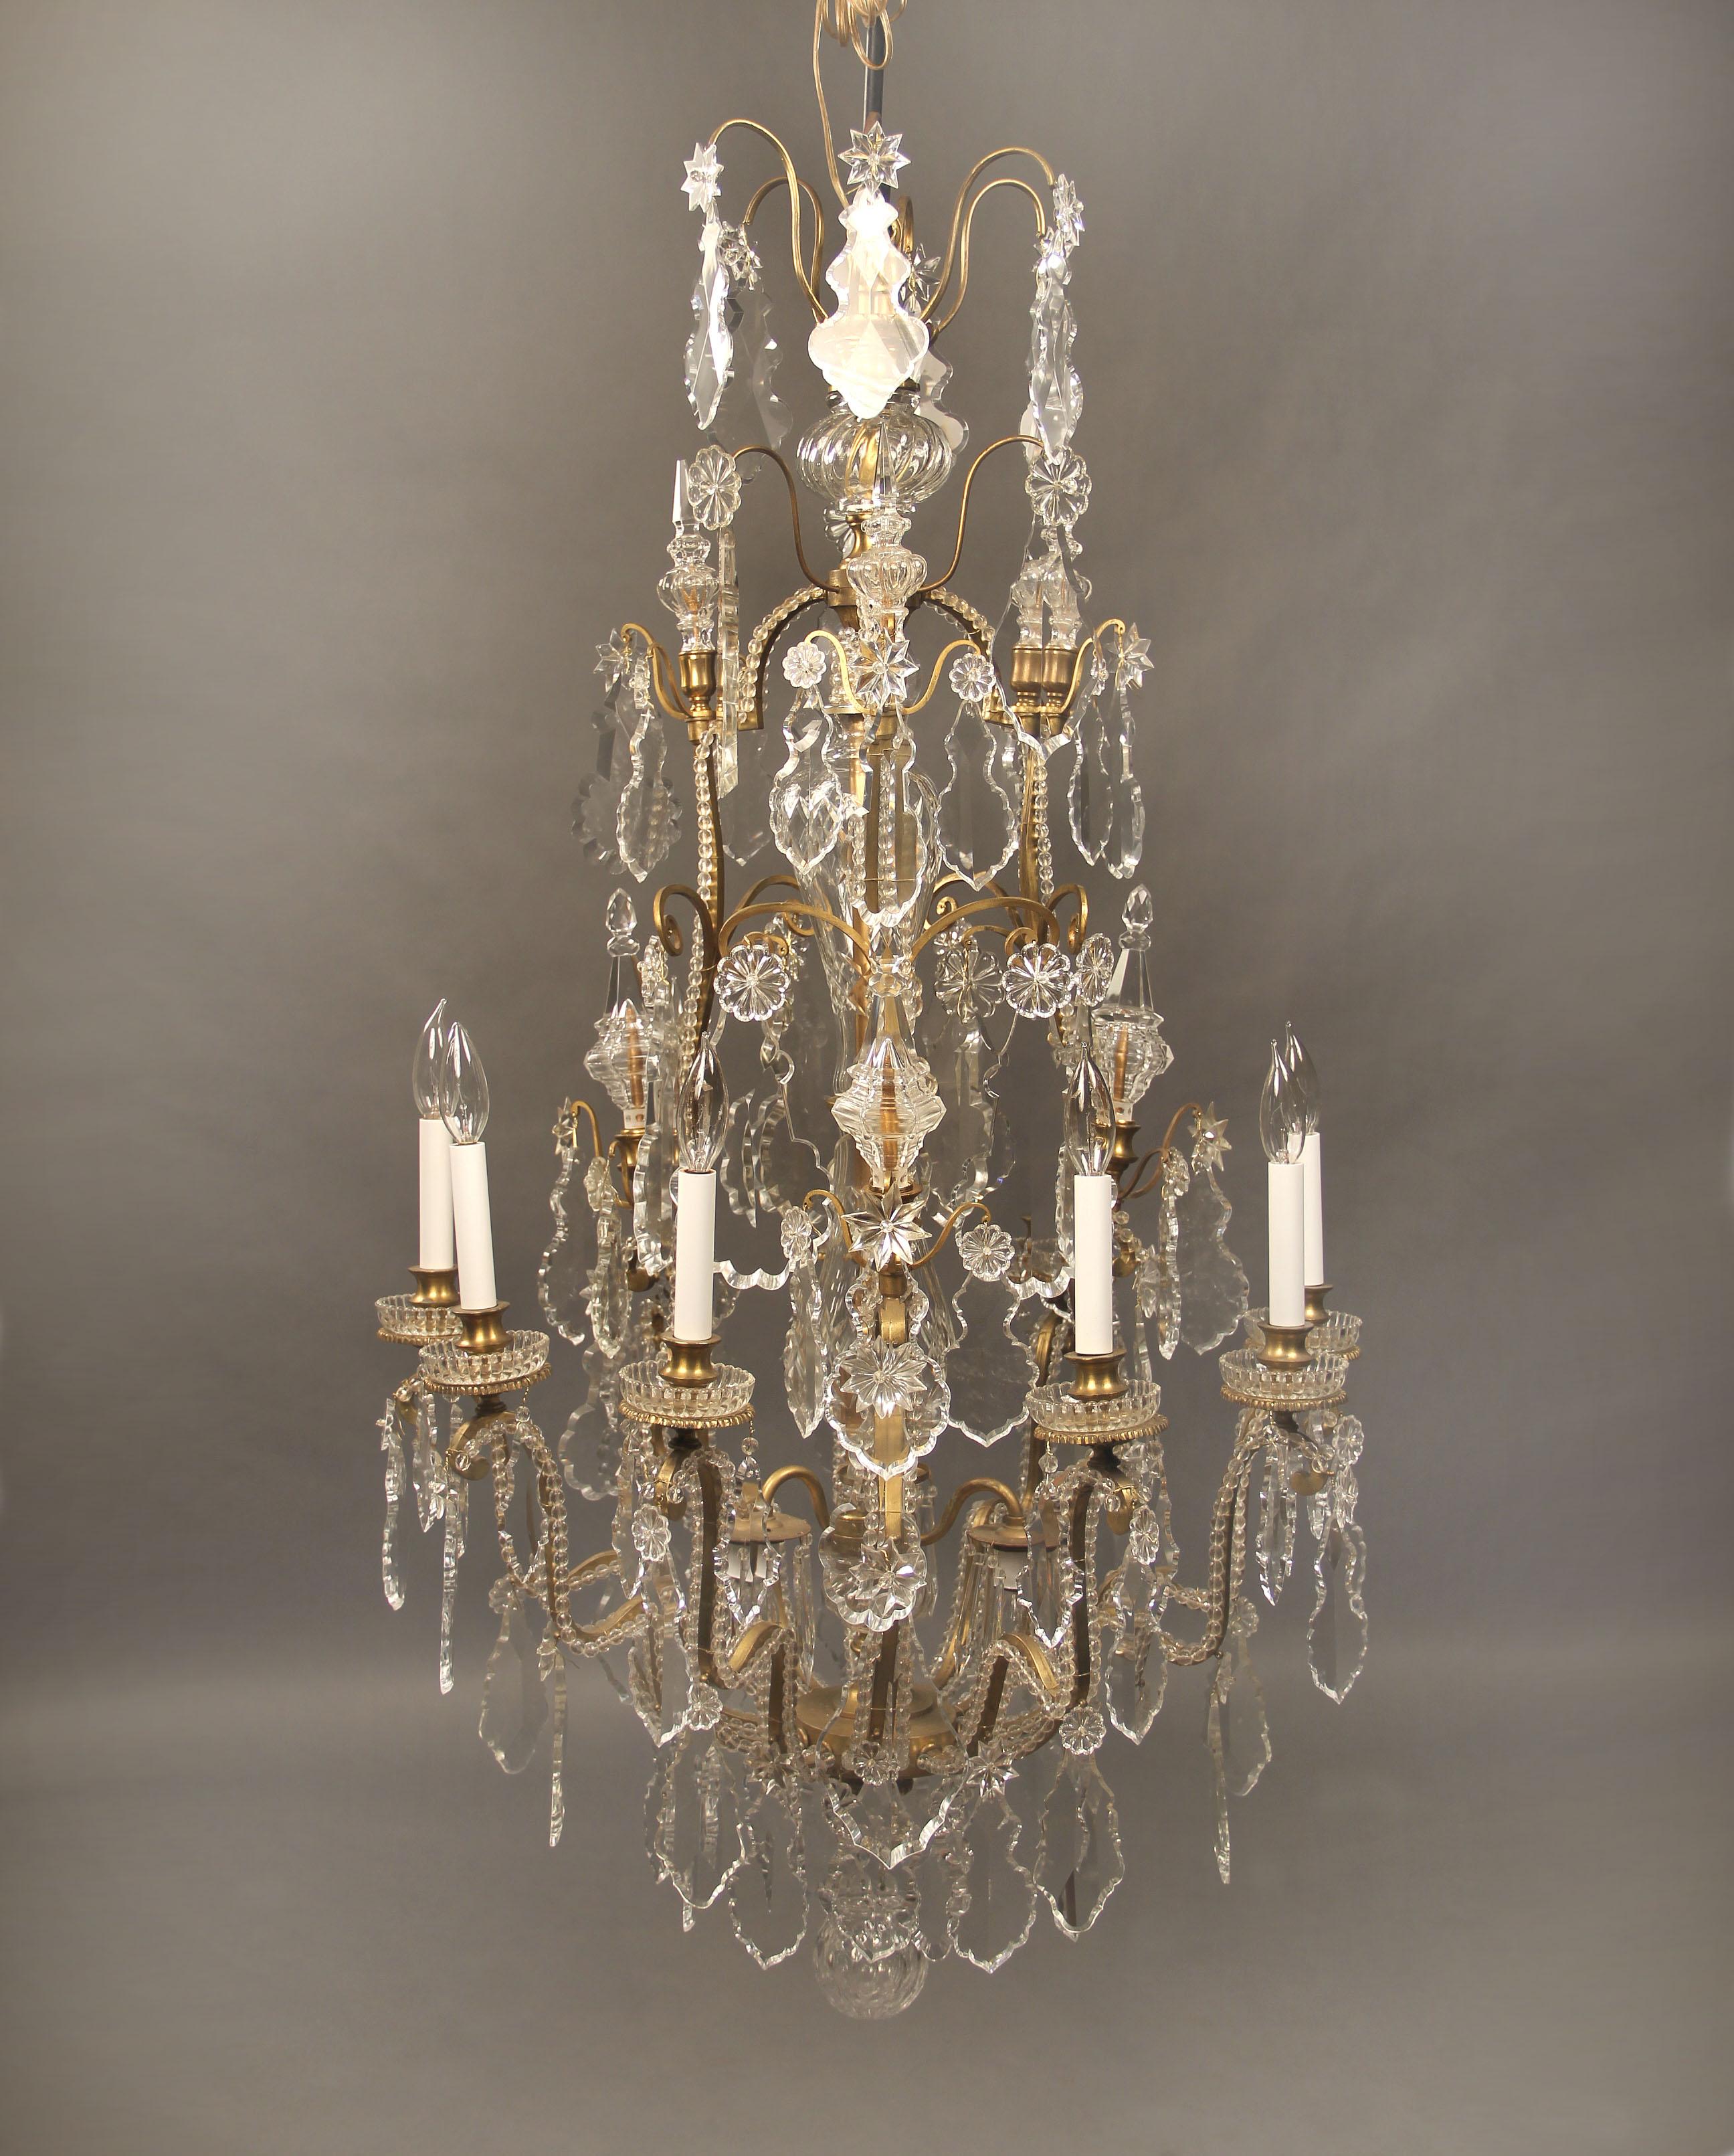 A wonderful late 19th century gilt bronze and baccarat crystal twelve-light chandelier

multifaceted and shaped crystal, beaded arms, cut crystal central column, six tiered spears, twelve perimeter lights, bobeche cups.